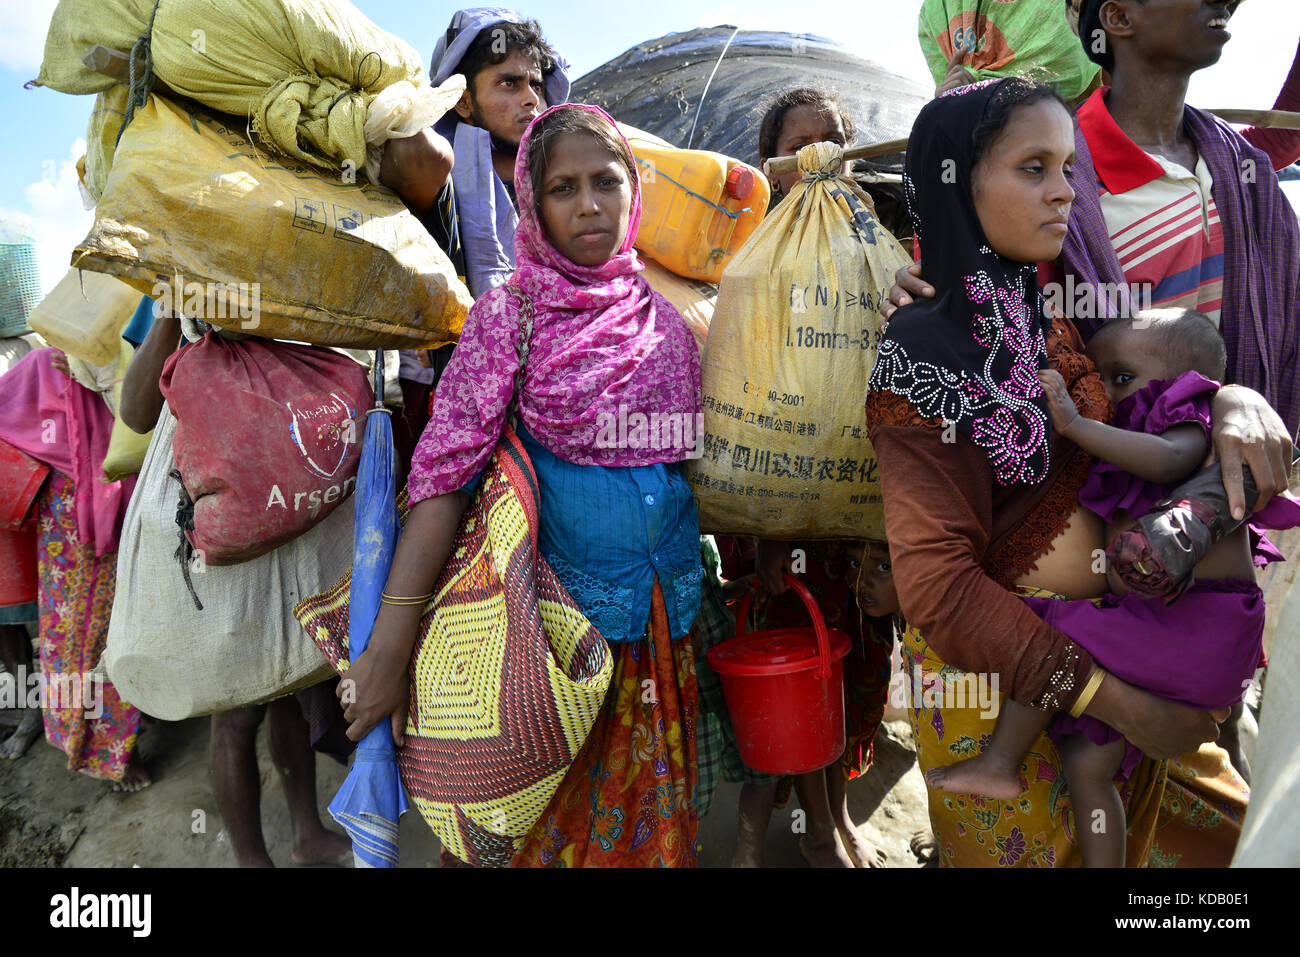 Hundreds of Rohingya people crossing Bangladesh's border as they flee from Buchidong at Myanmar after crossing the Nuf River in Taknuf, Bangladesh. Stock Photo